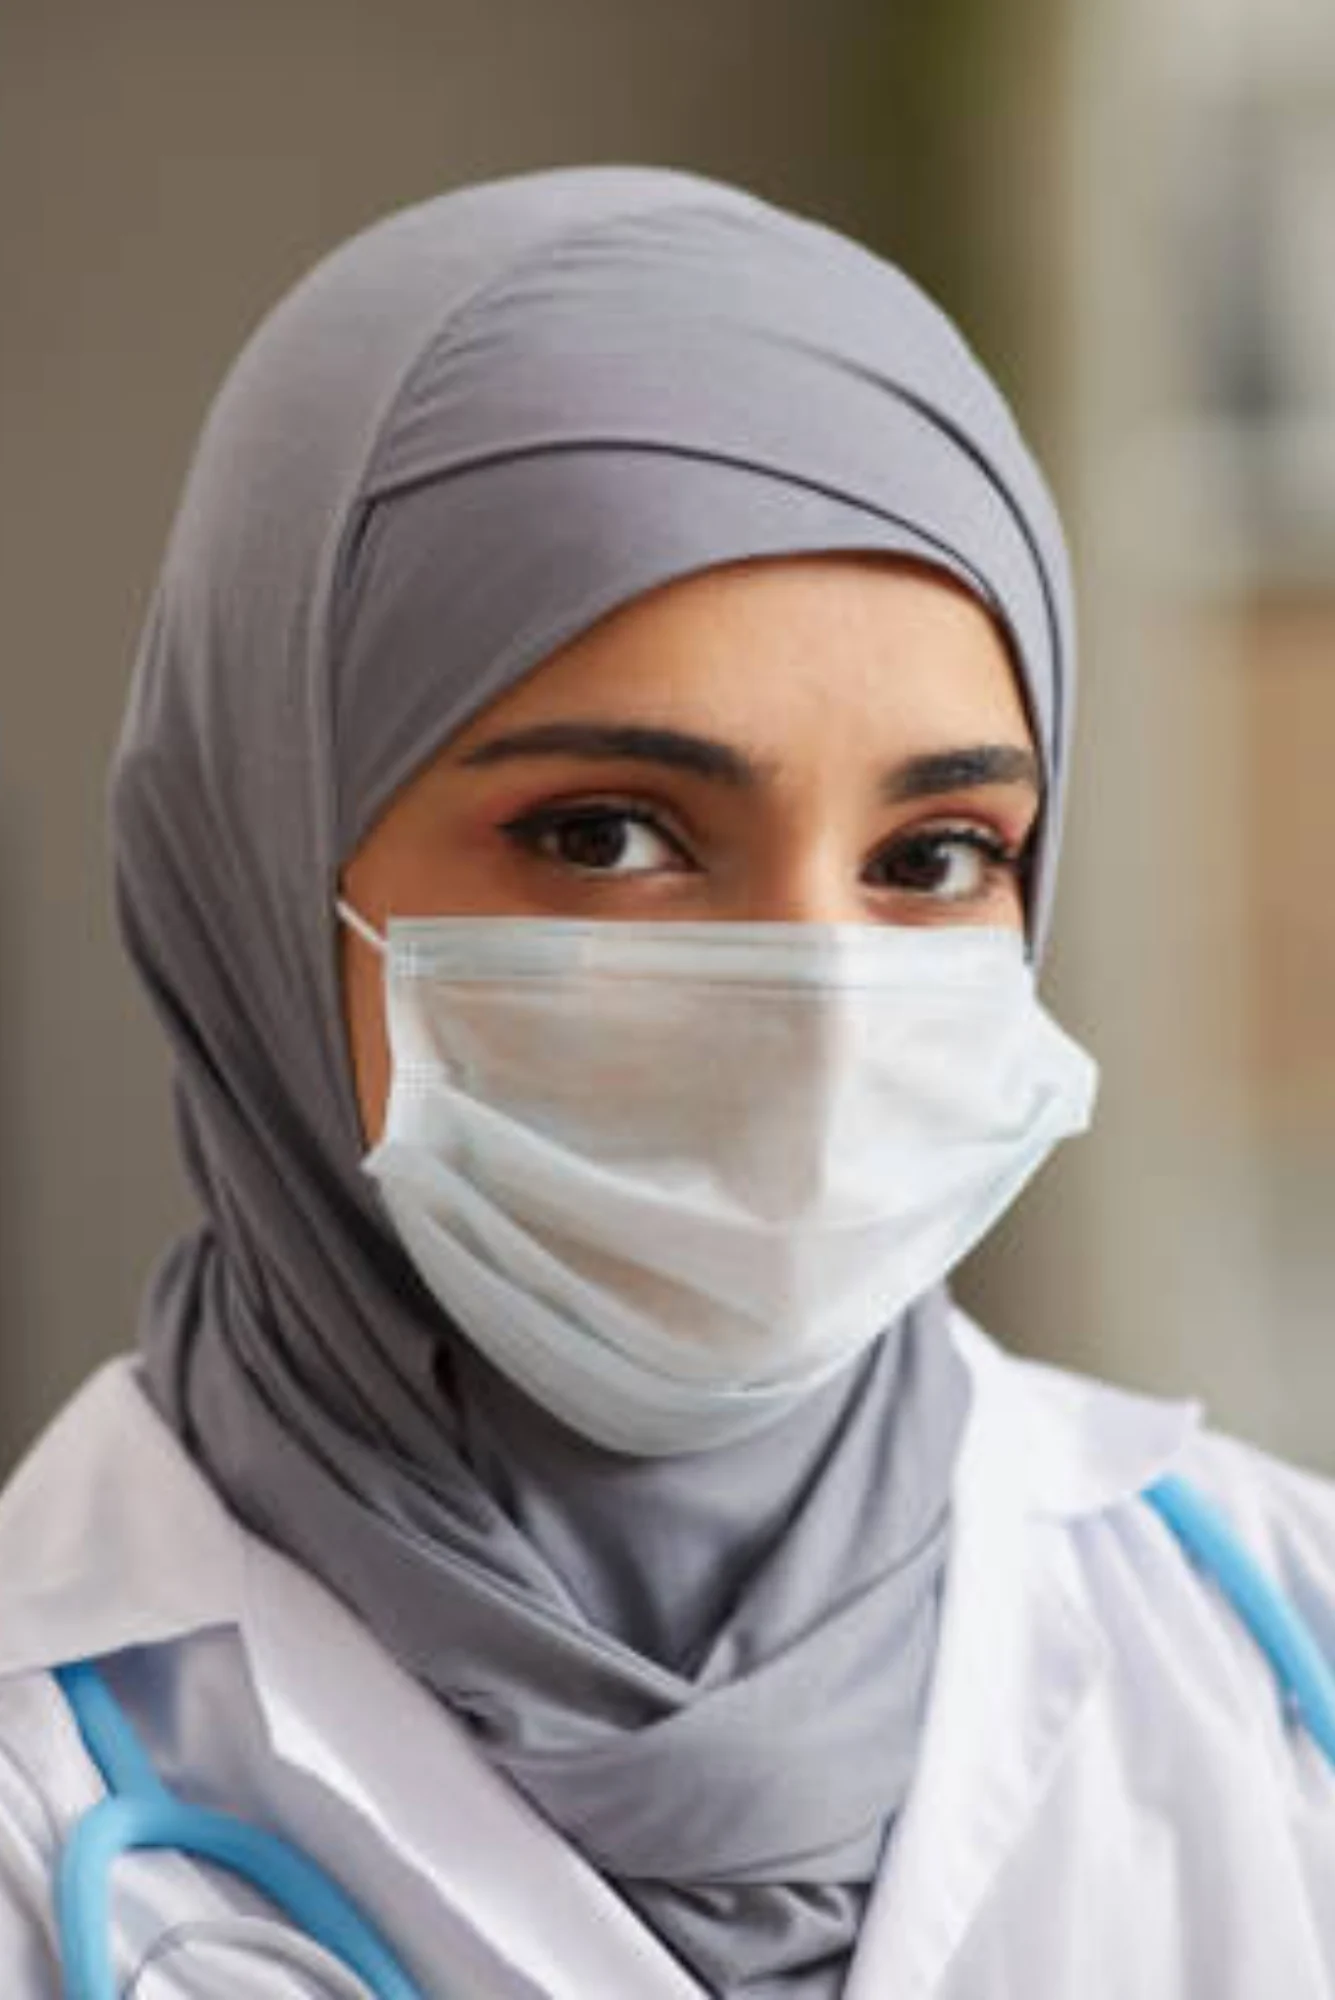 Doctor in Hijab